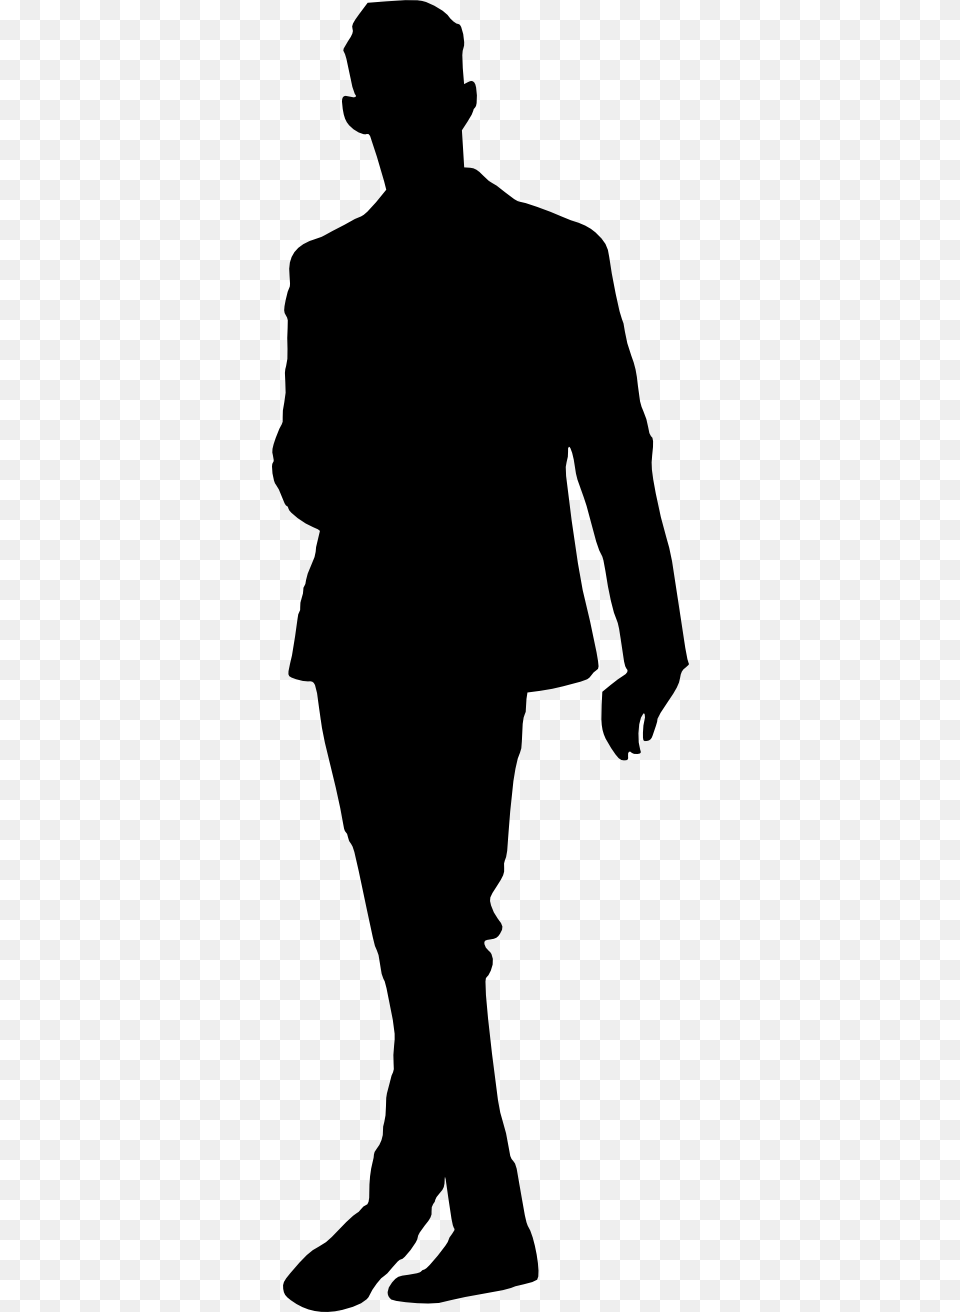 Black Soldier Cut Out, Silhouette, Adult, Male, Man Png